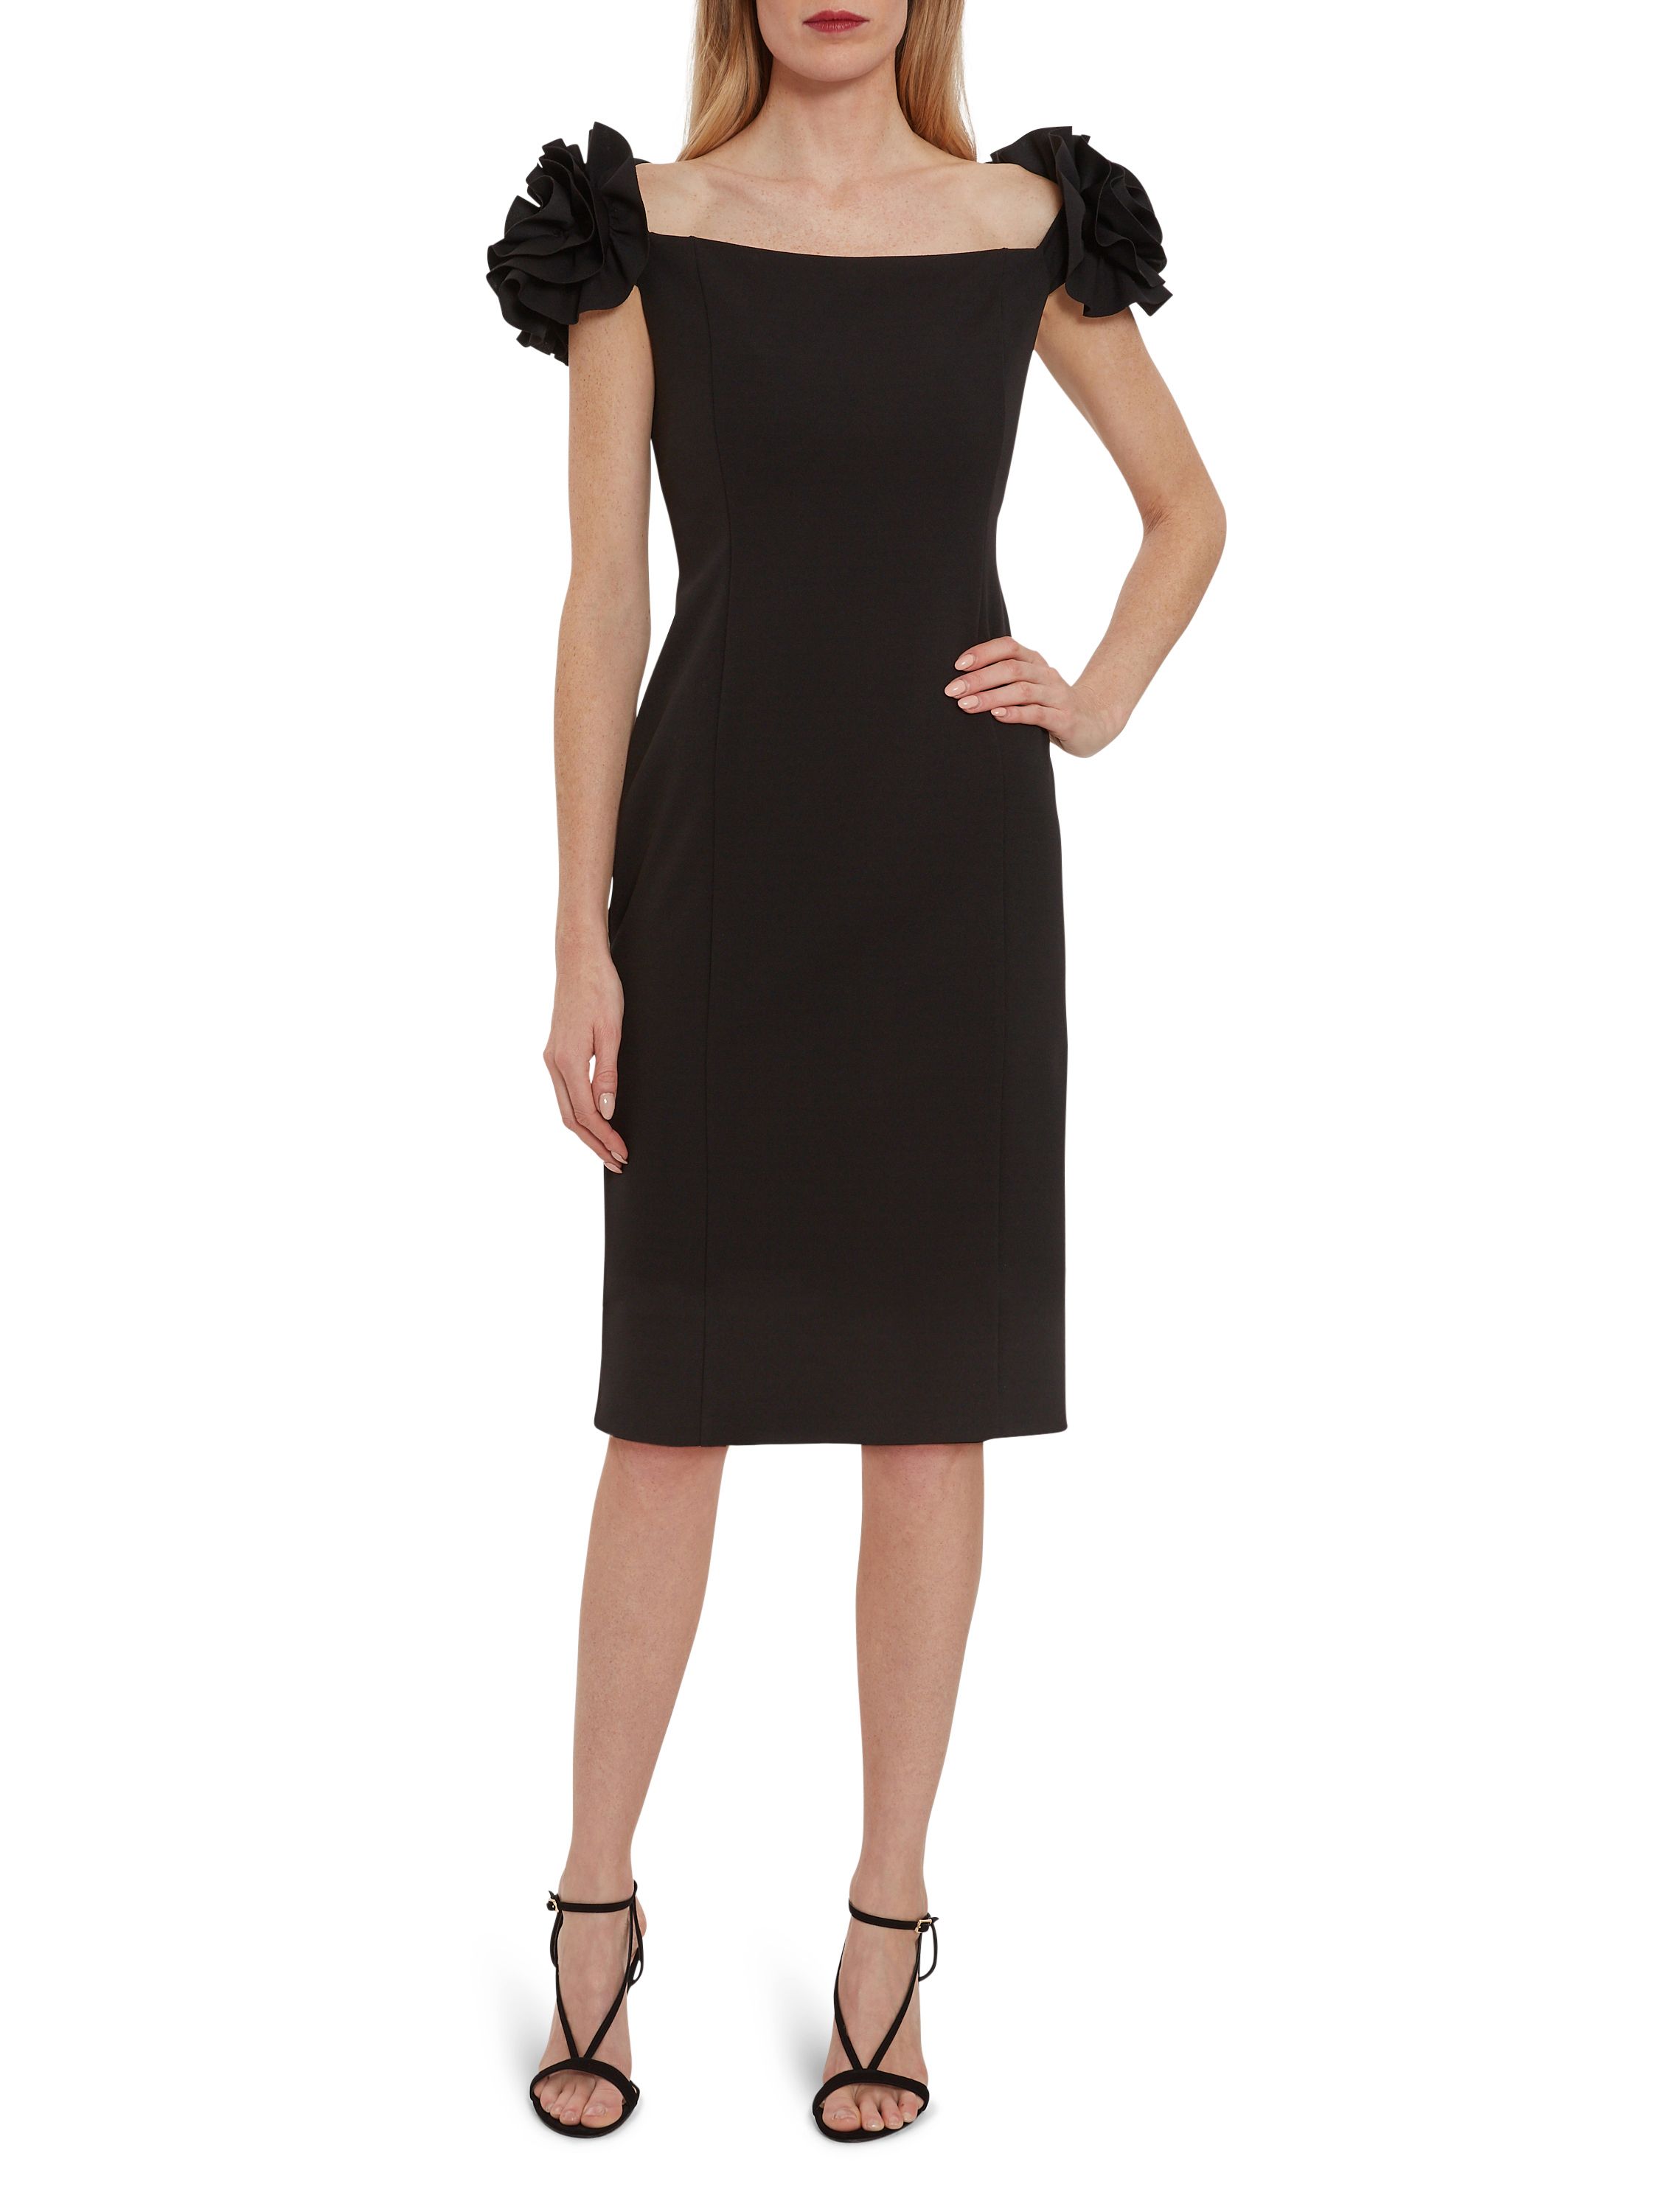 This glamorous stretch crepe dress by Gina Bacconi will make you feel stunning. The off the shoulder neckline with ruffle detailing adds an elegant finish. It is fully lined and fastened with a concealed back zip. Perfect for a party or a special occasion.